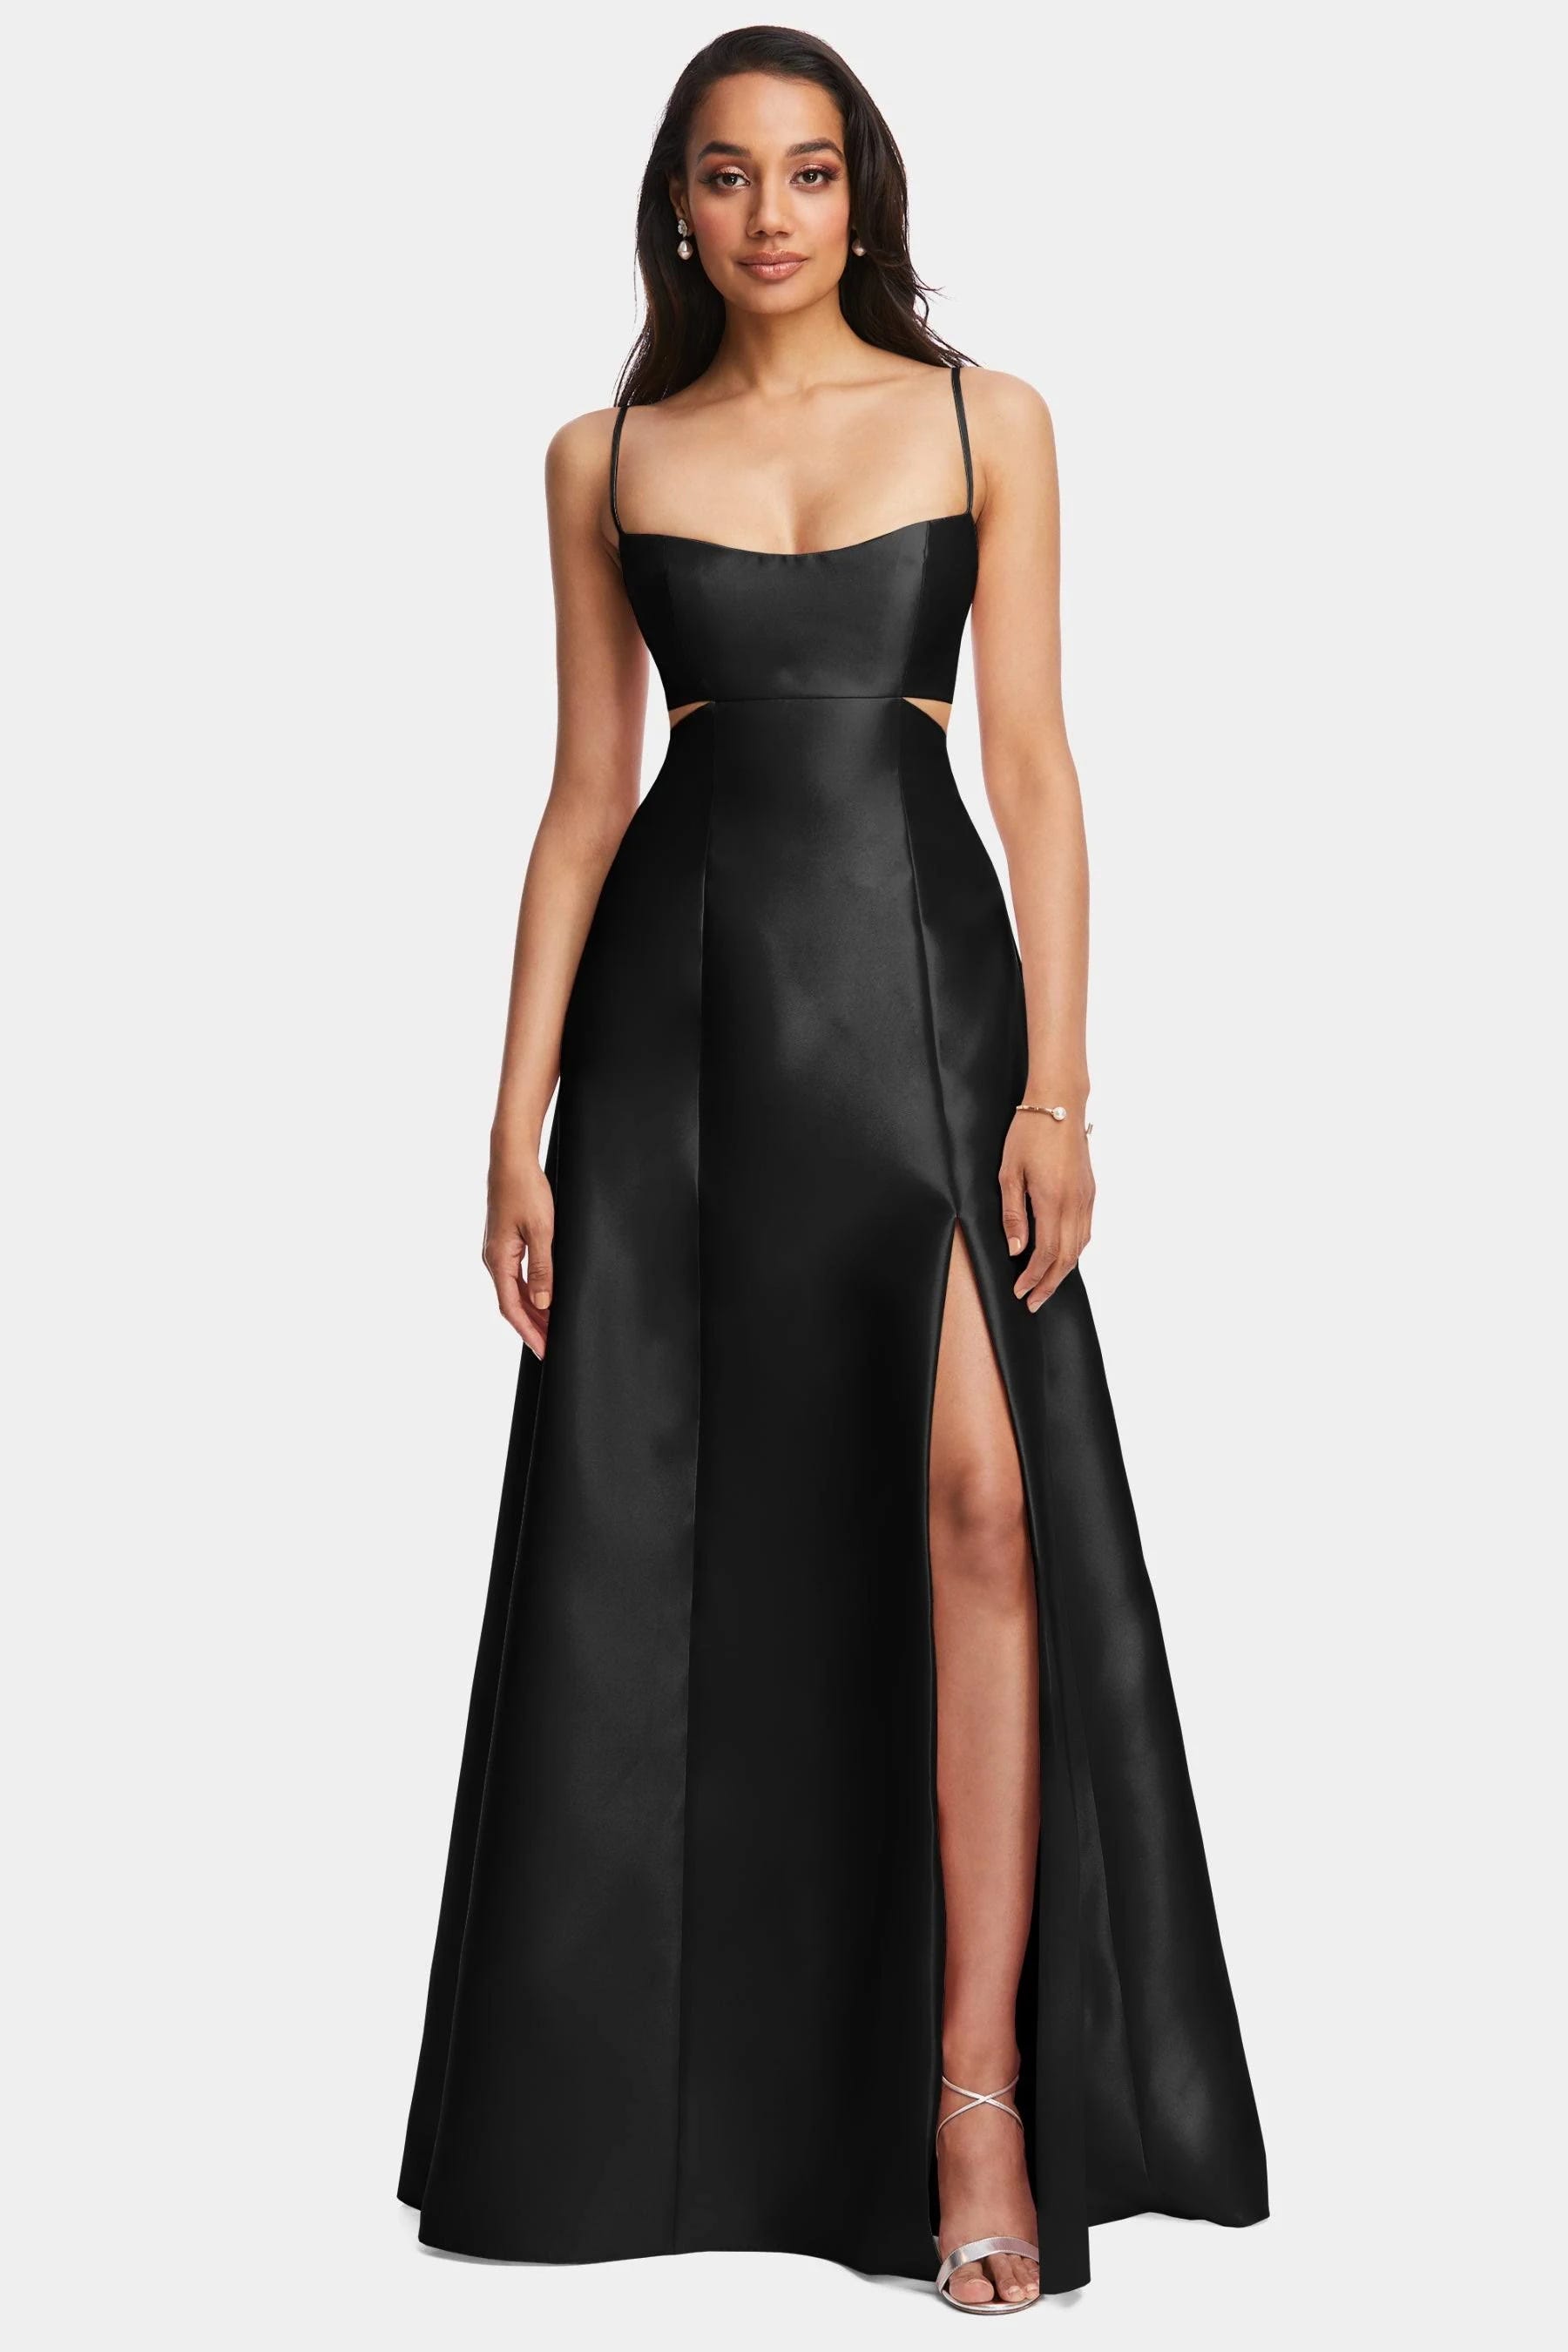 Black Satin Maxi Dress by Alfred Sung | Image